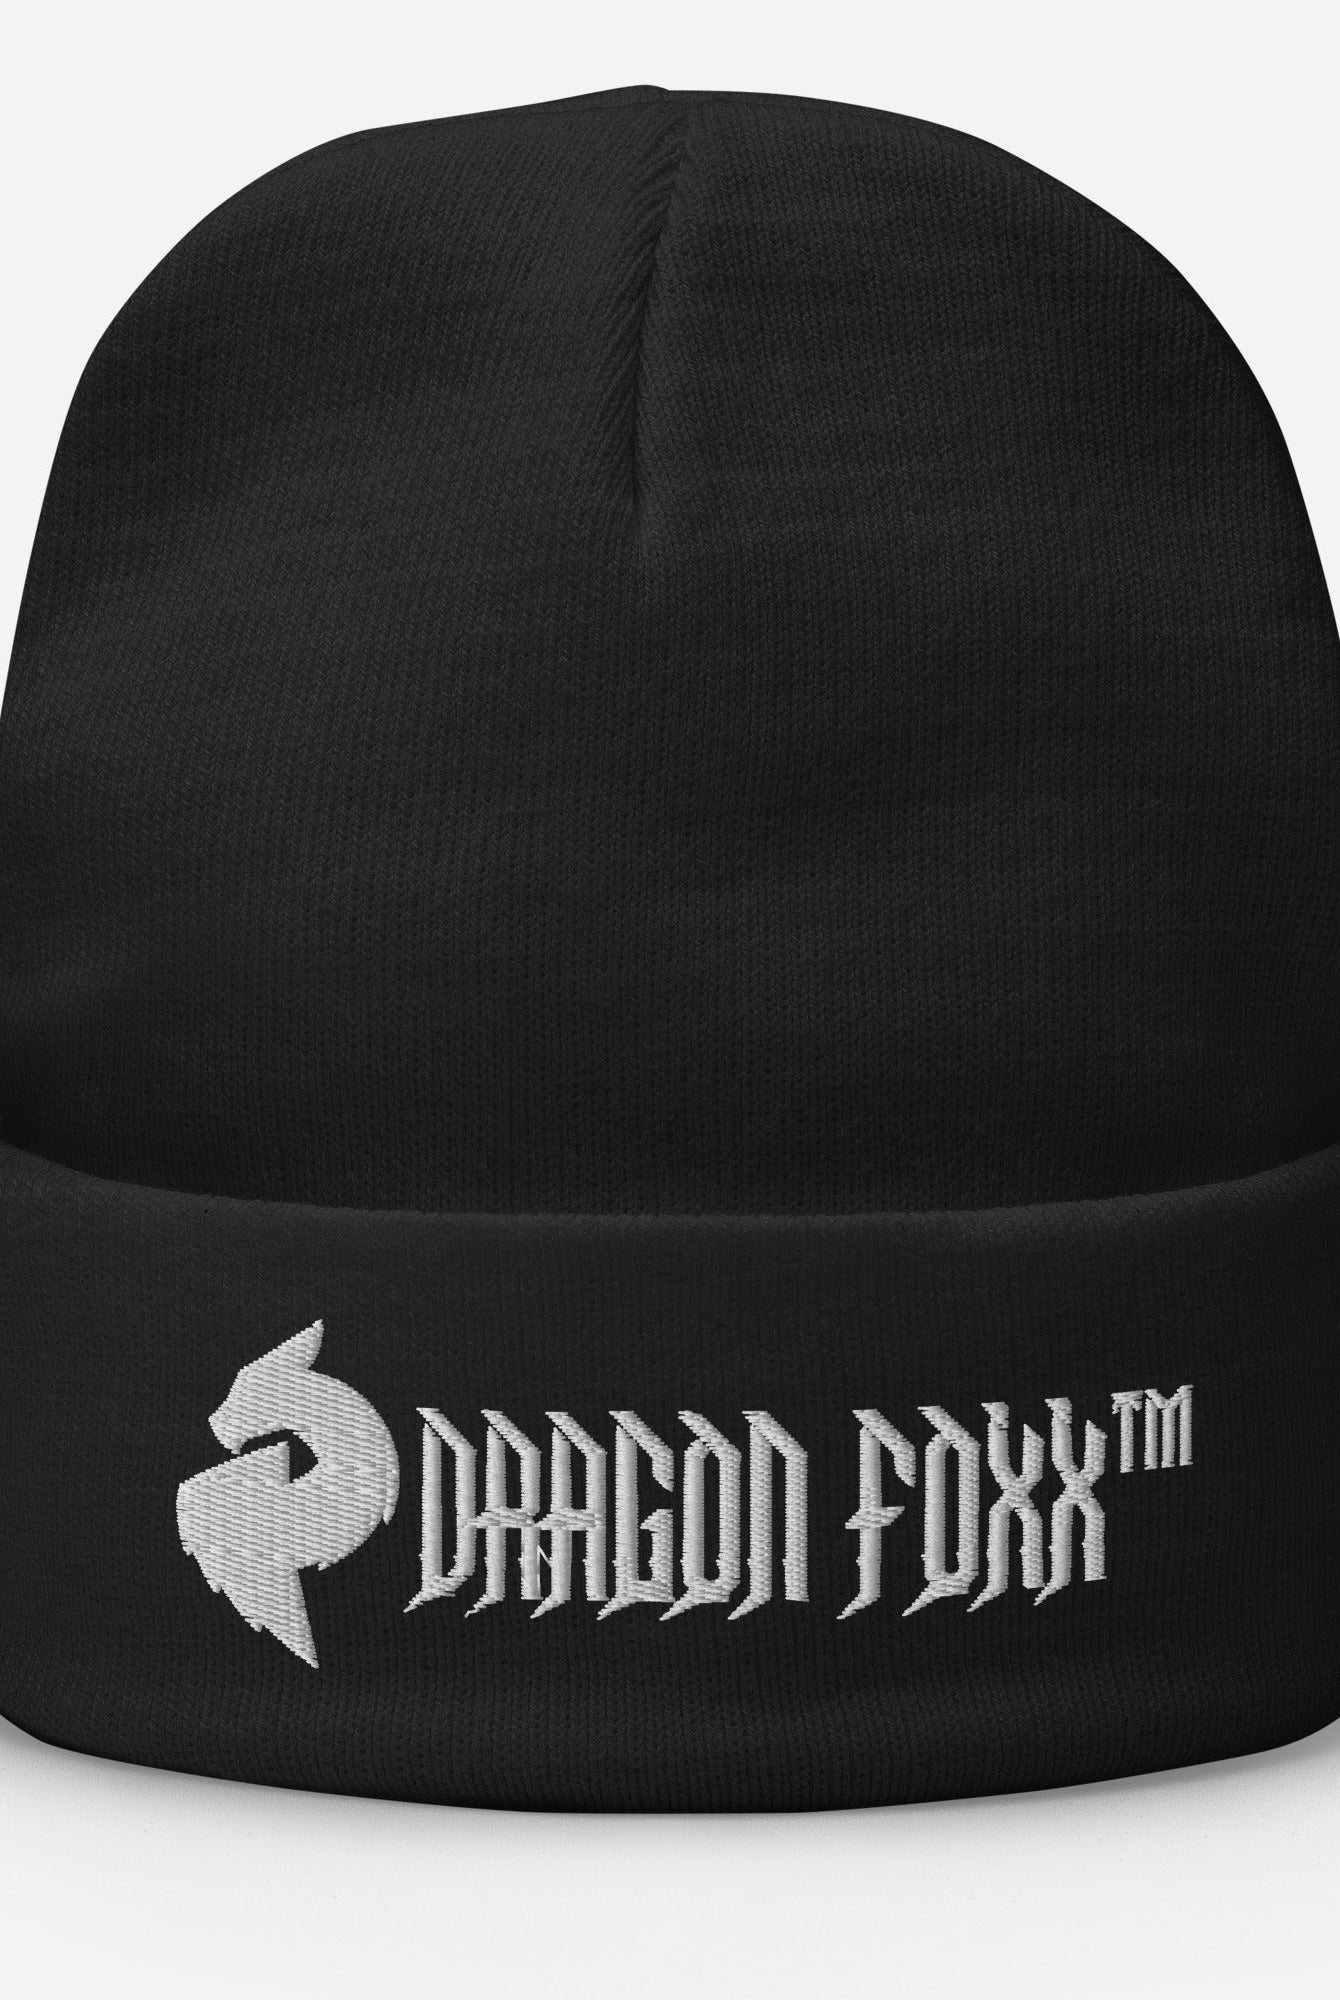 His or Hers Dragon Foxx™ Embroidered Beanie in 6 Colors - Dragon Foxx™ Embroidered Beanie - DRAGON FOXX™ - His or Hers Dragon Foxx™ Embroidered Beanie in 6 Colors - 9861092_4522 - Black - - Beanies - Black Beanie - Dark Green Beanie